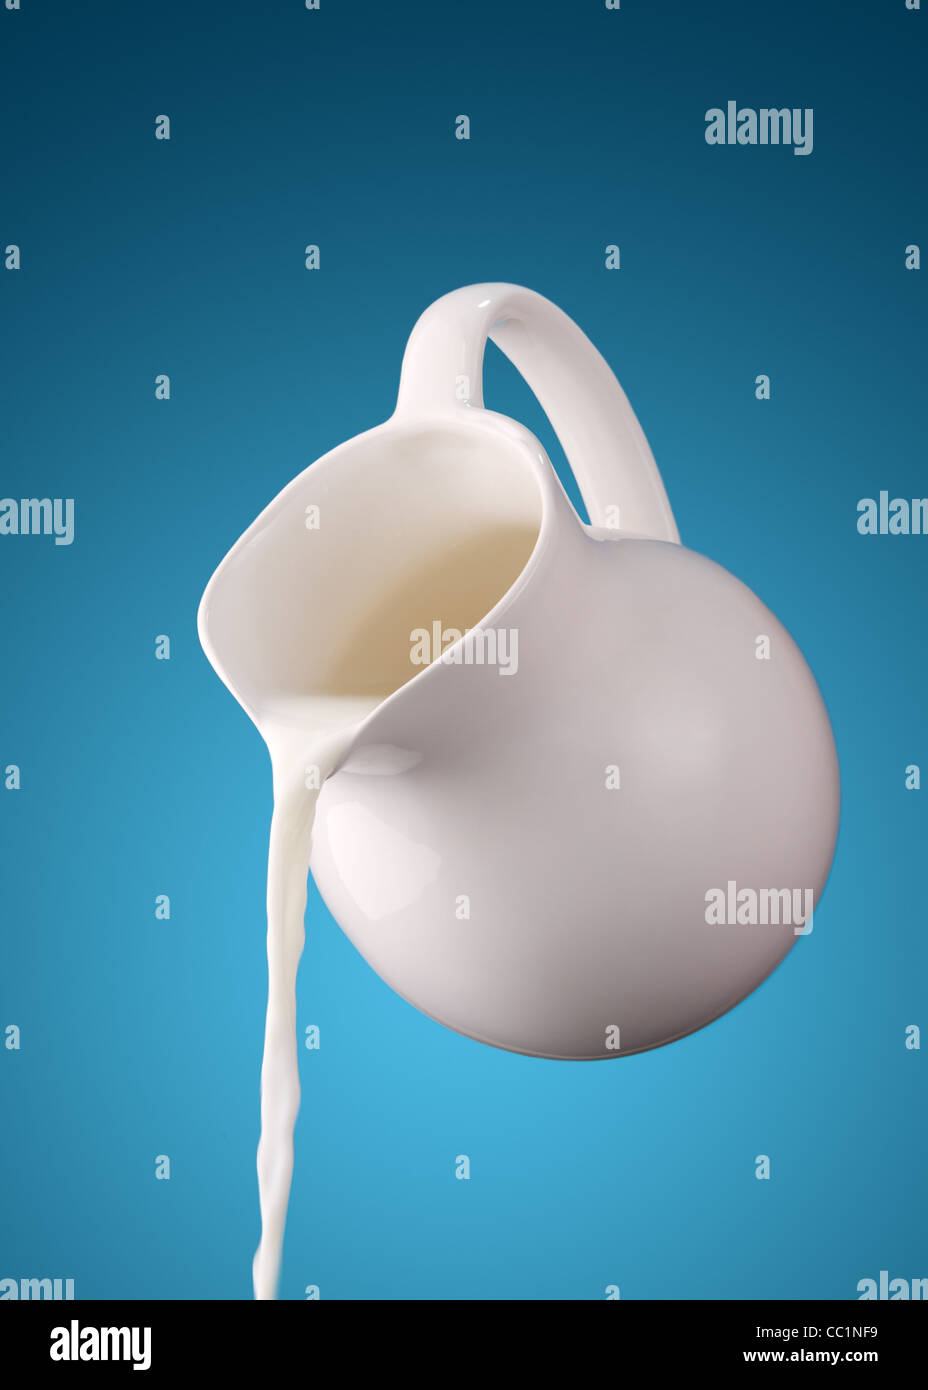 pitcher of milk on a blue background Stock Photo